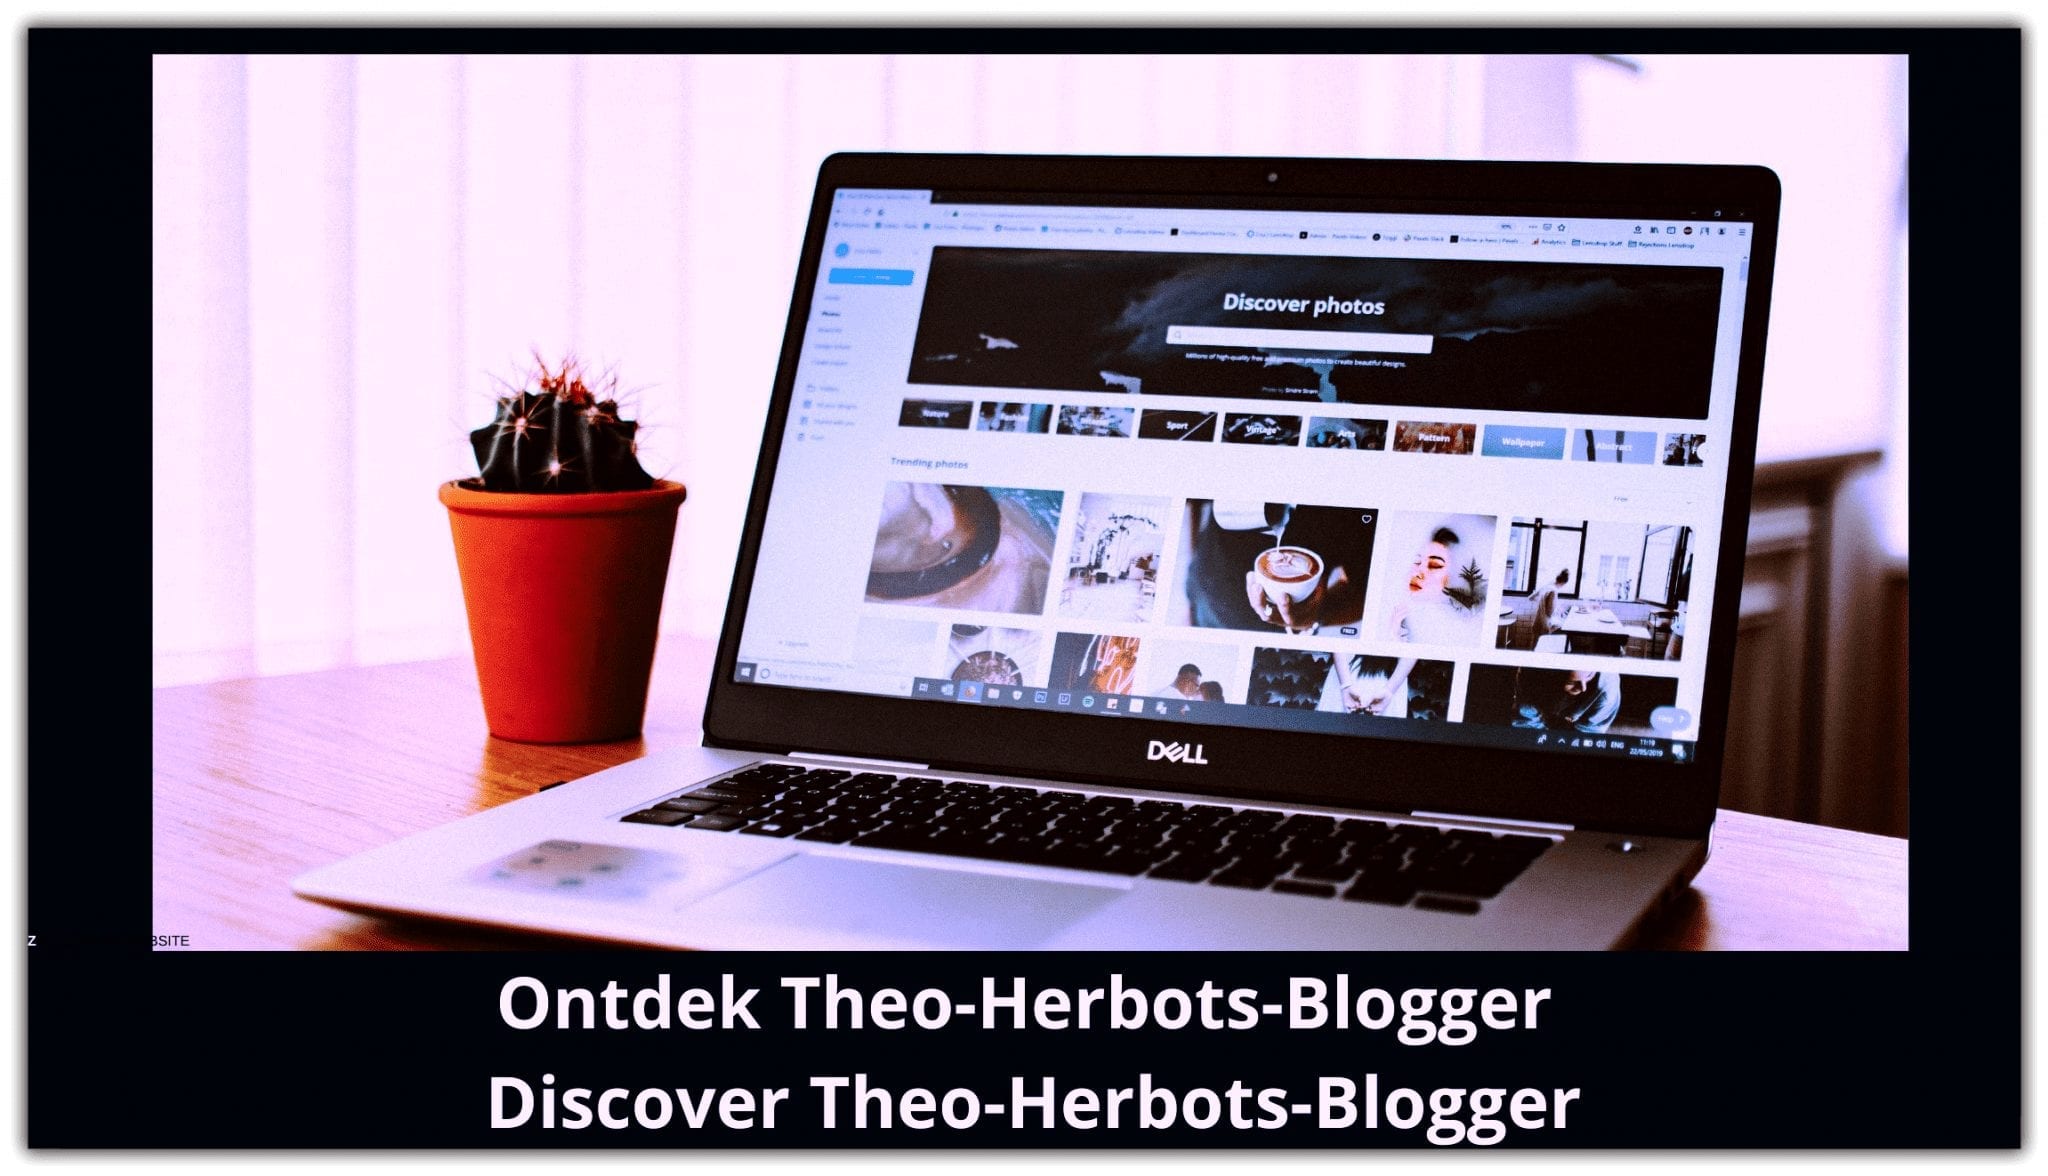 Ontdek Theo-Herbots-Blogger || Discover Theo-Herbots-Blogger